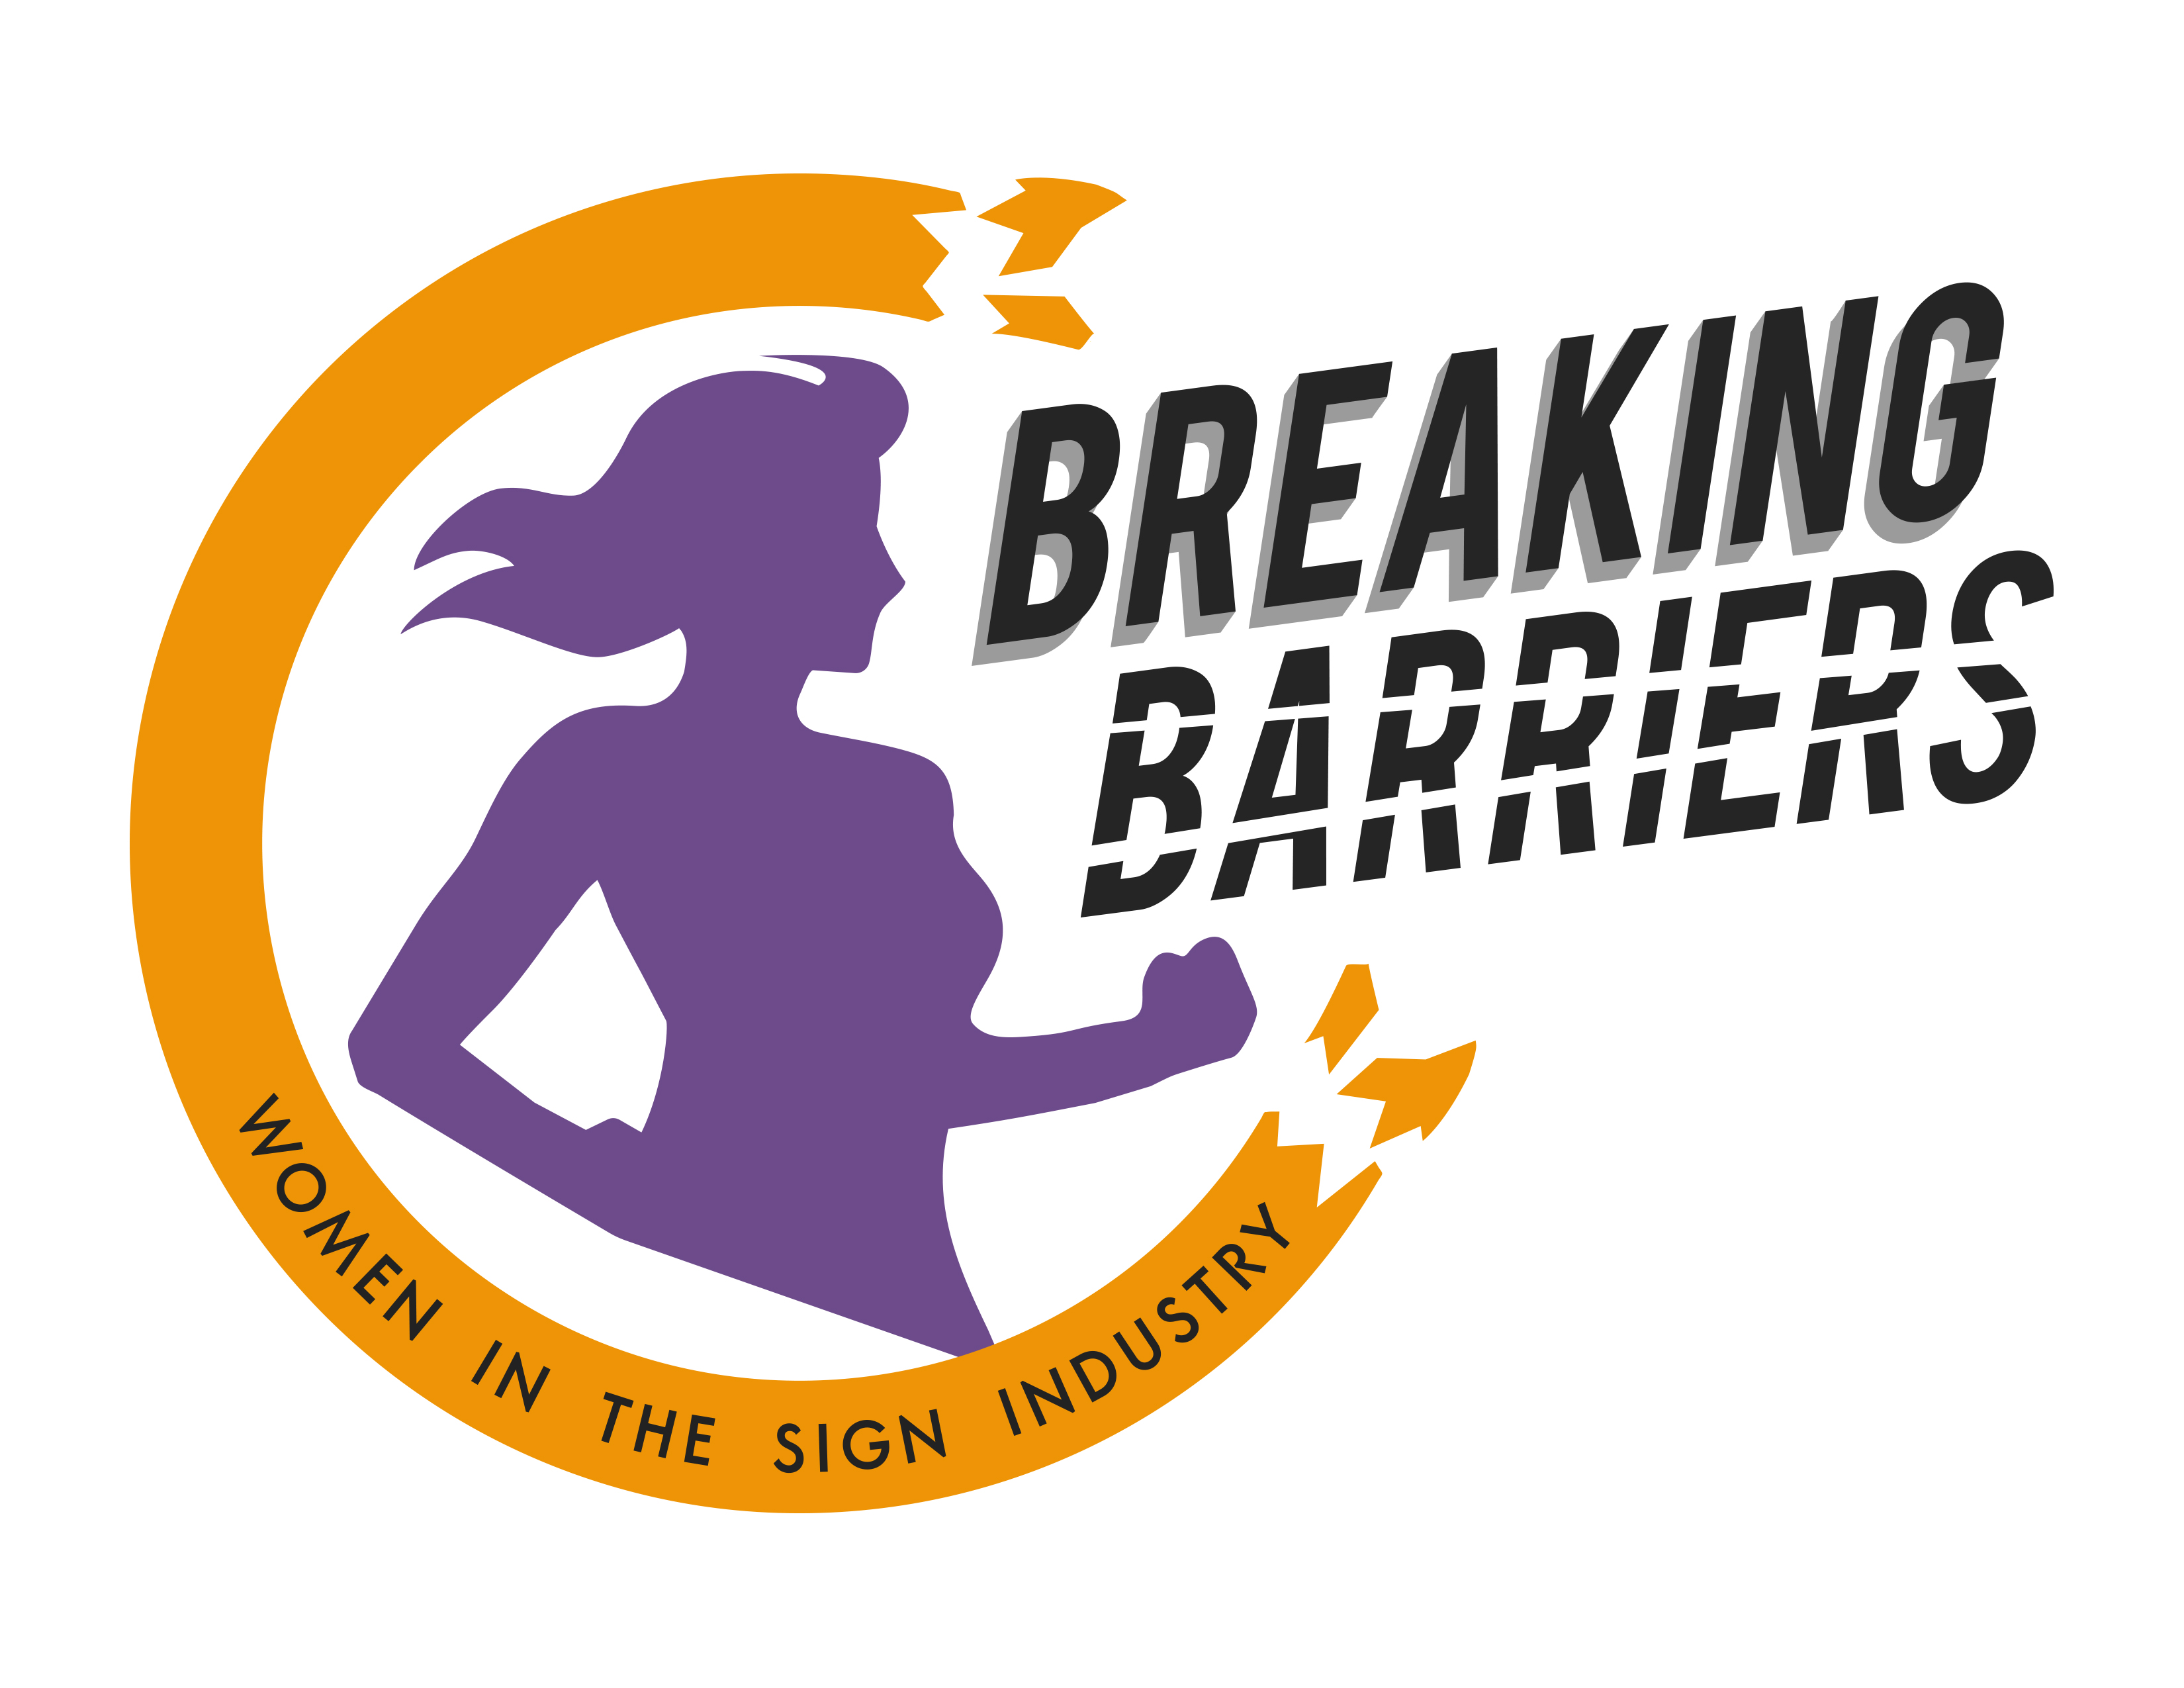 Breaking Barriers: Sign Expo Canada to Host Women's Event - Sign  Association of Canada